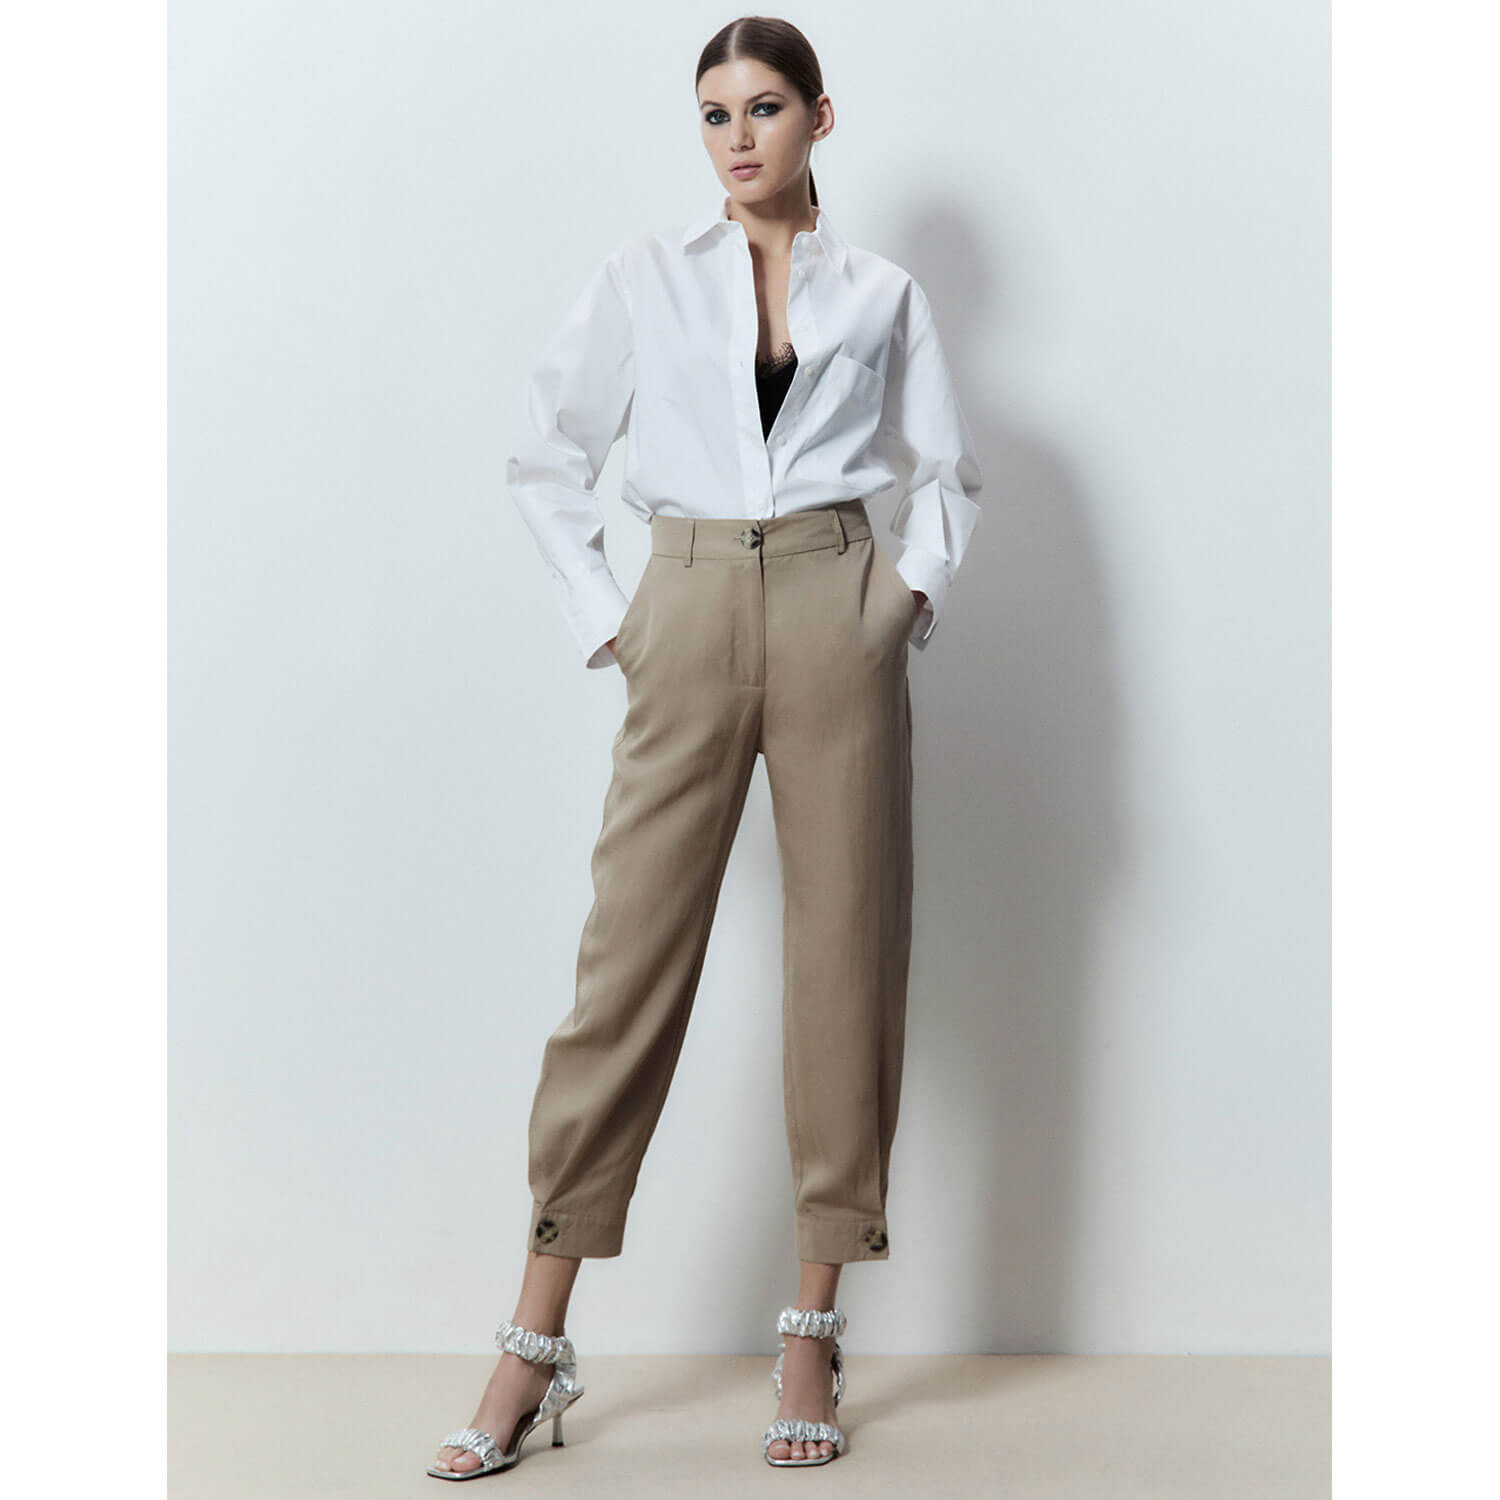 Sfera Flowy trousers 3 Shaws Department Stores